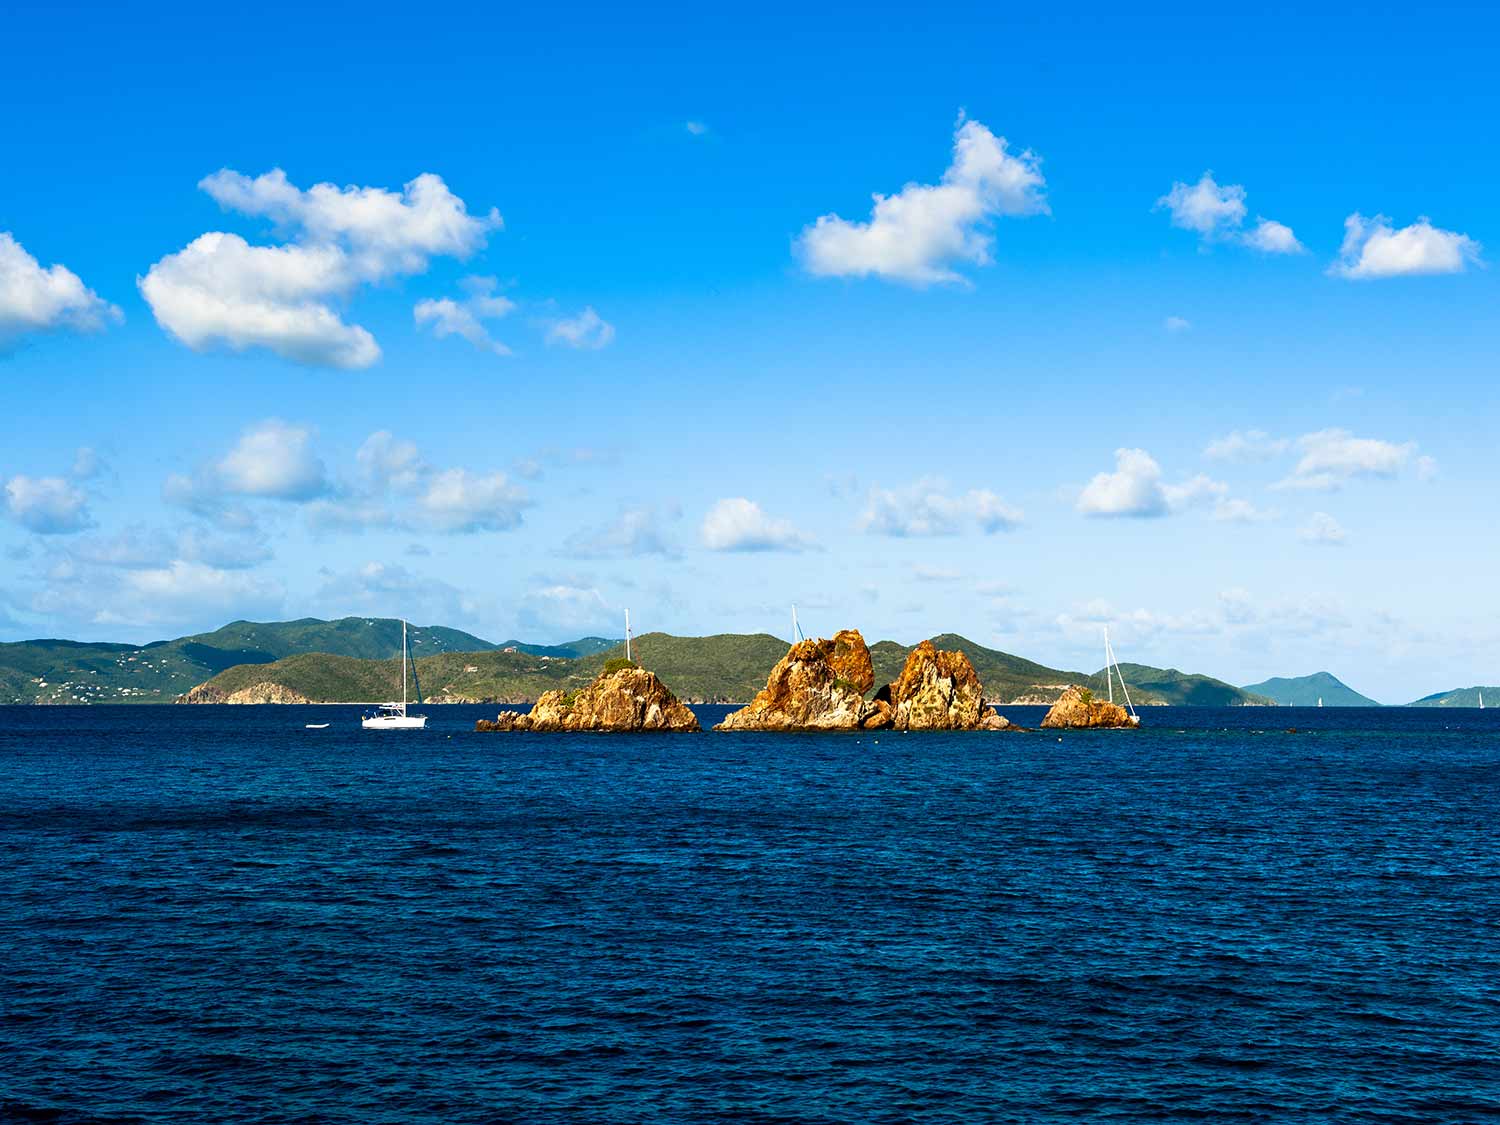 The Indians are a must-see rock formation located near Norman Island British Virgin Islands